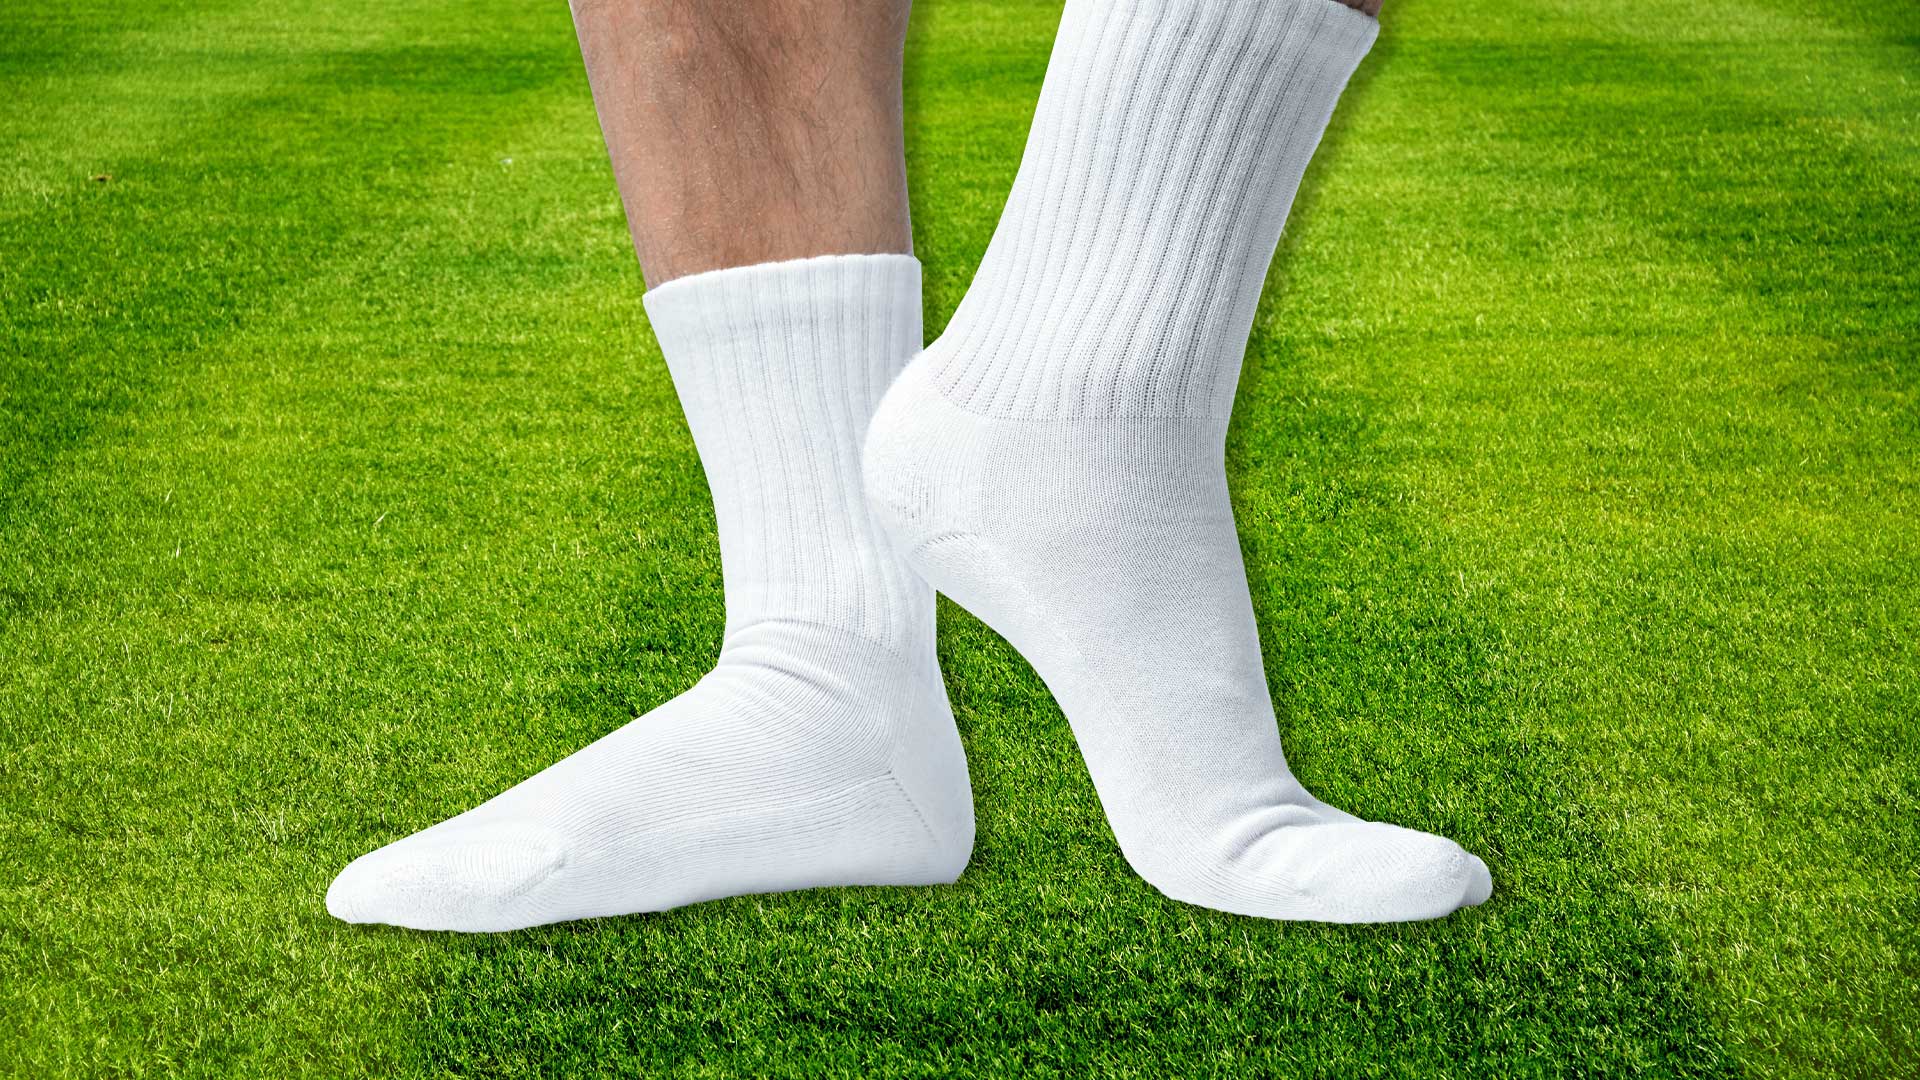 A pair of white sports socks